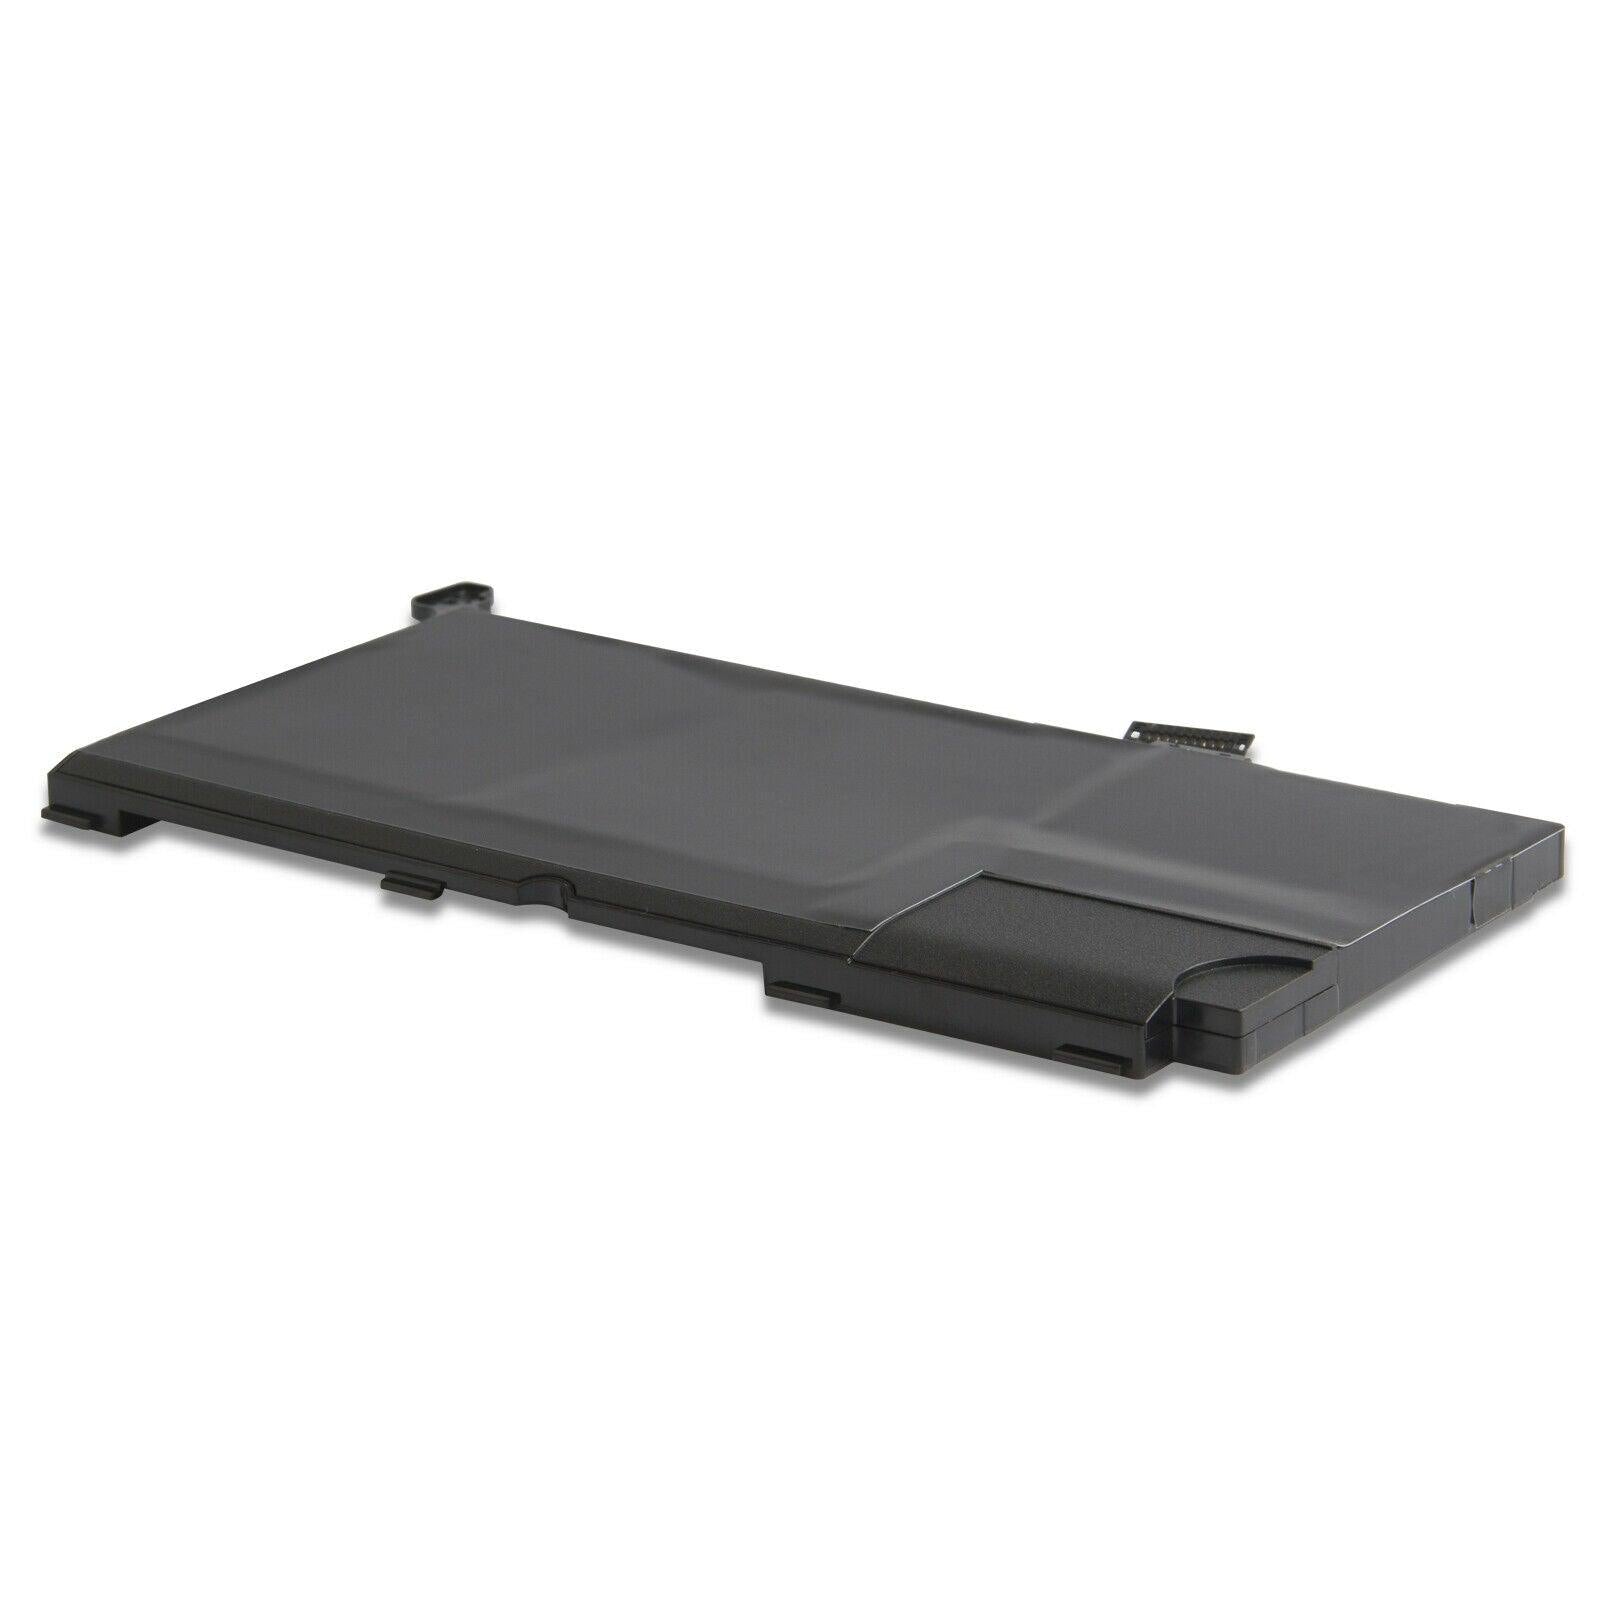 Replacement C31-S551 50Wh 11.1V Battery for Asus S551LA Series S551LB-CJ026H - Office Catch